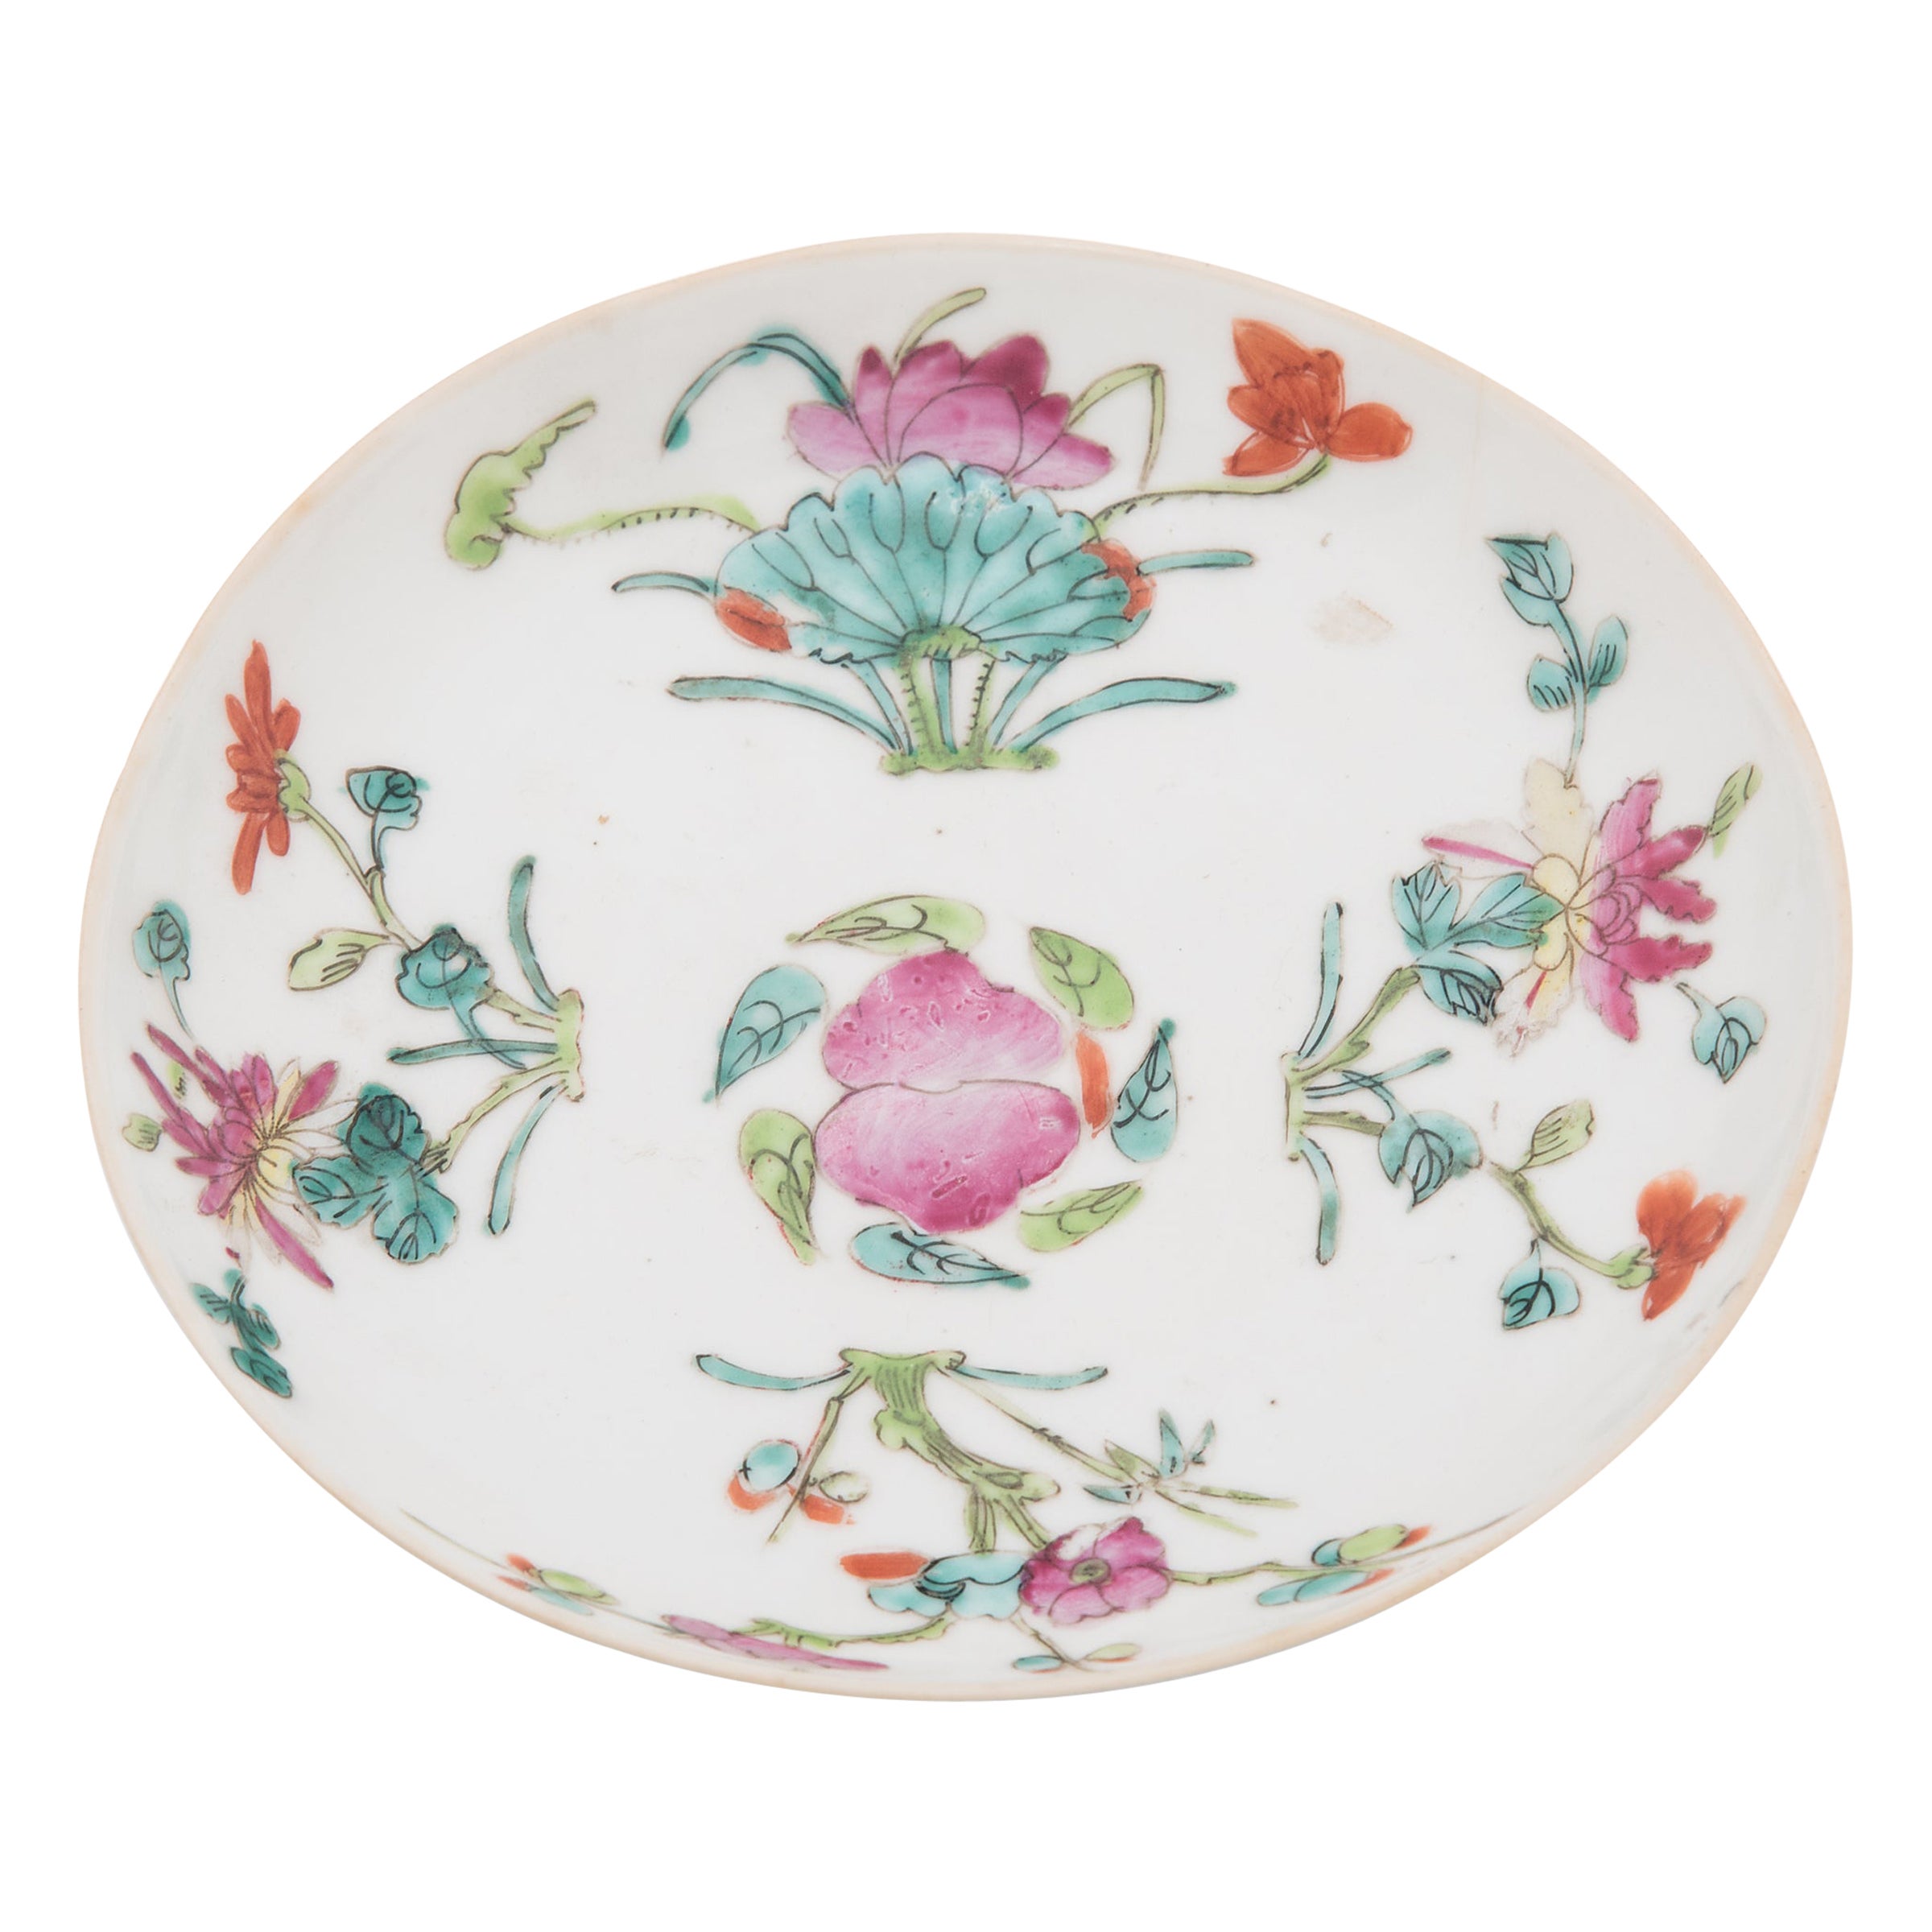 Chinese Famille Rose Four Seasons Plate, c. 1900